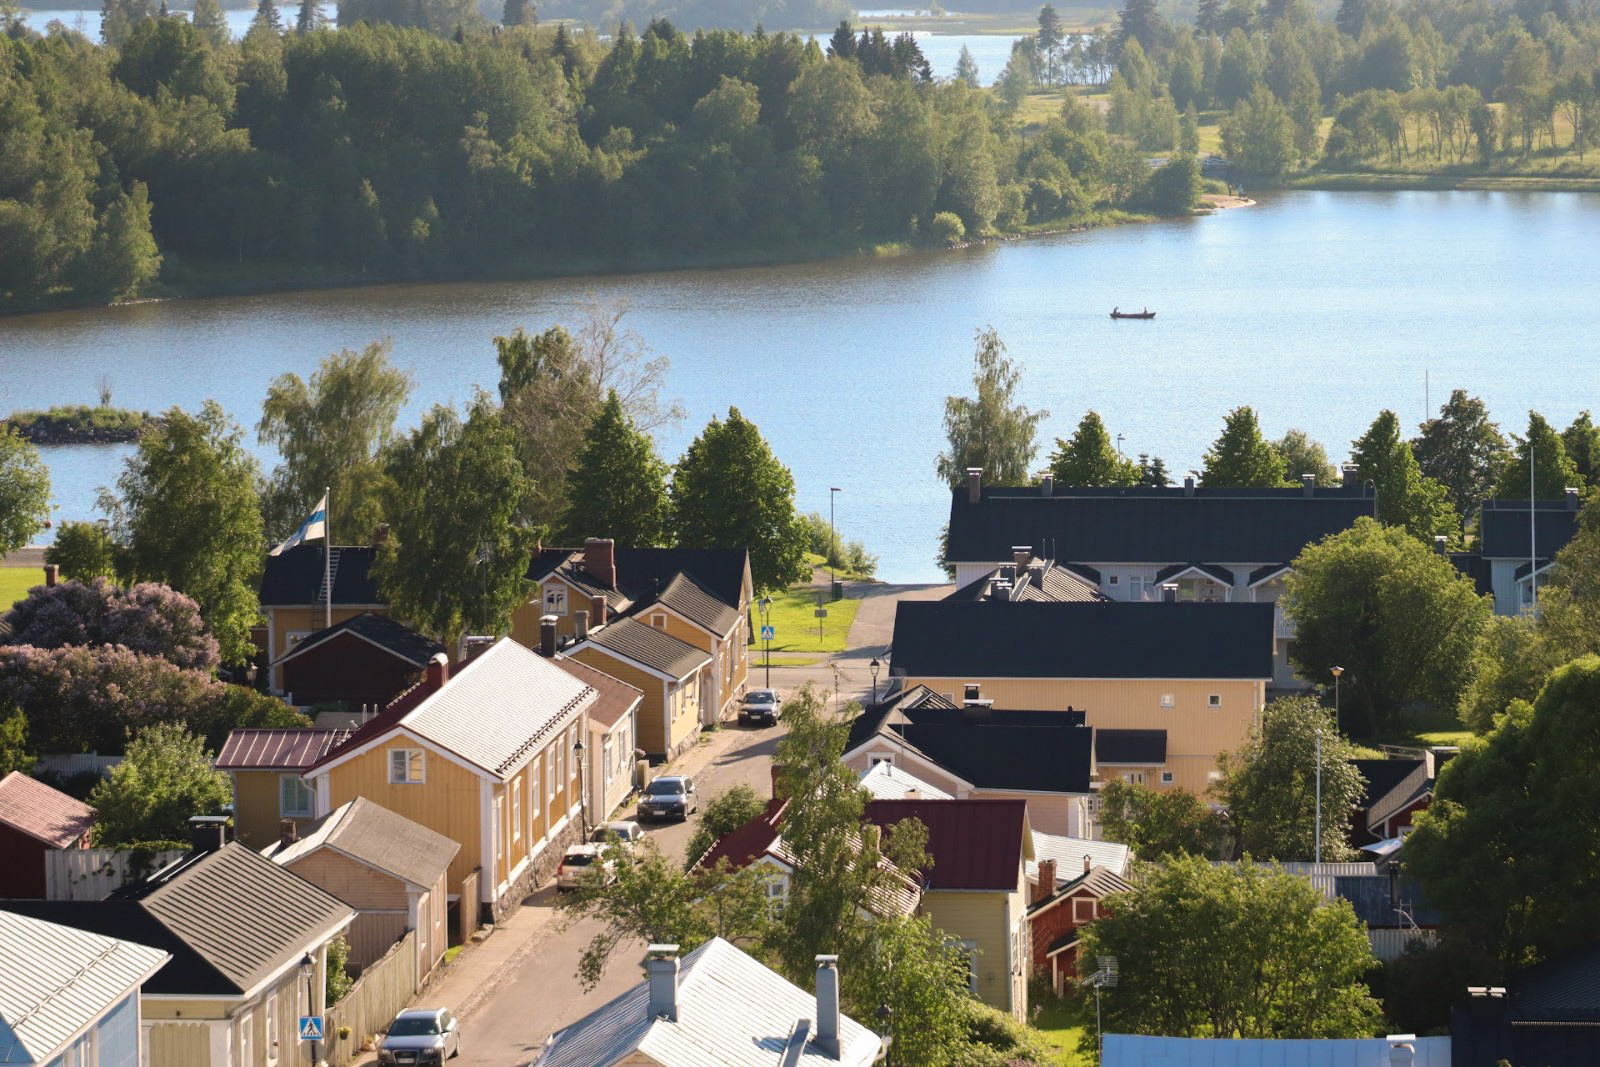 Old Raahe photographed from above.